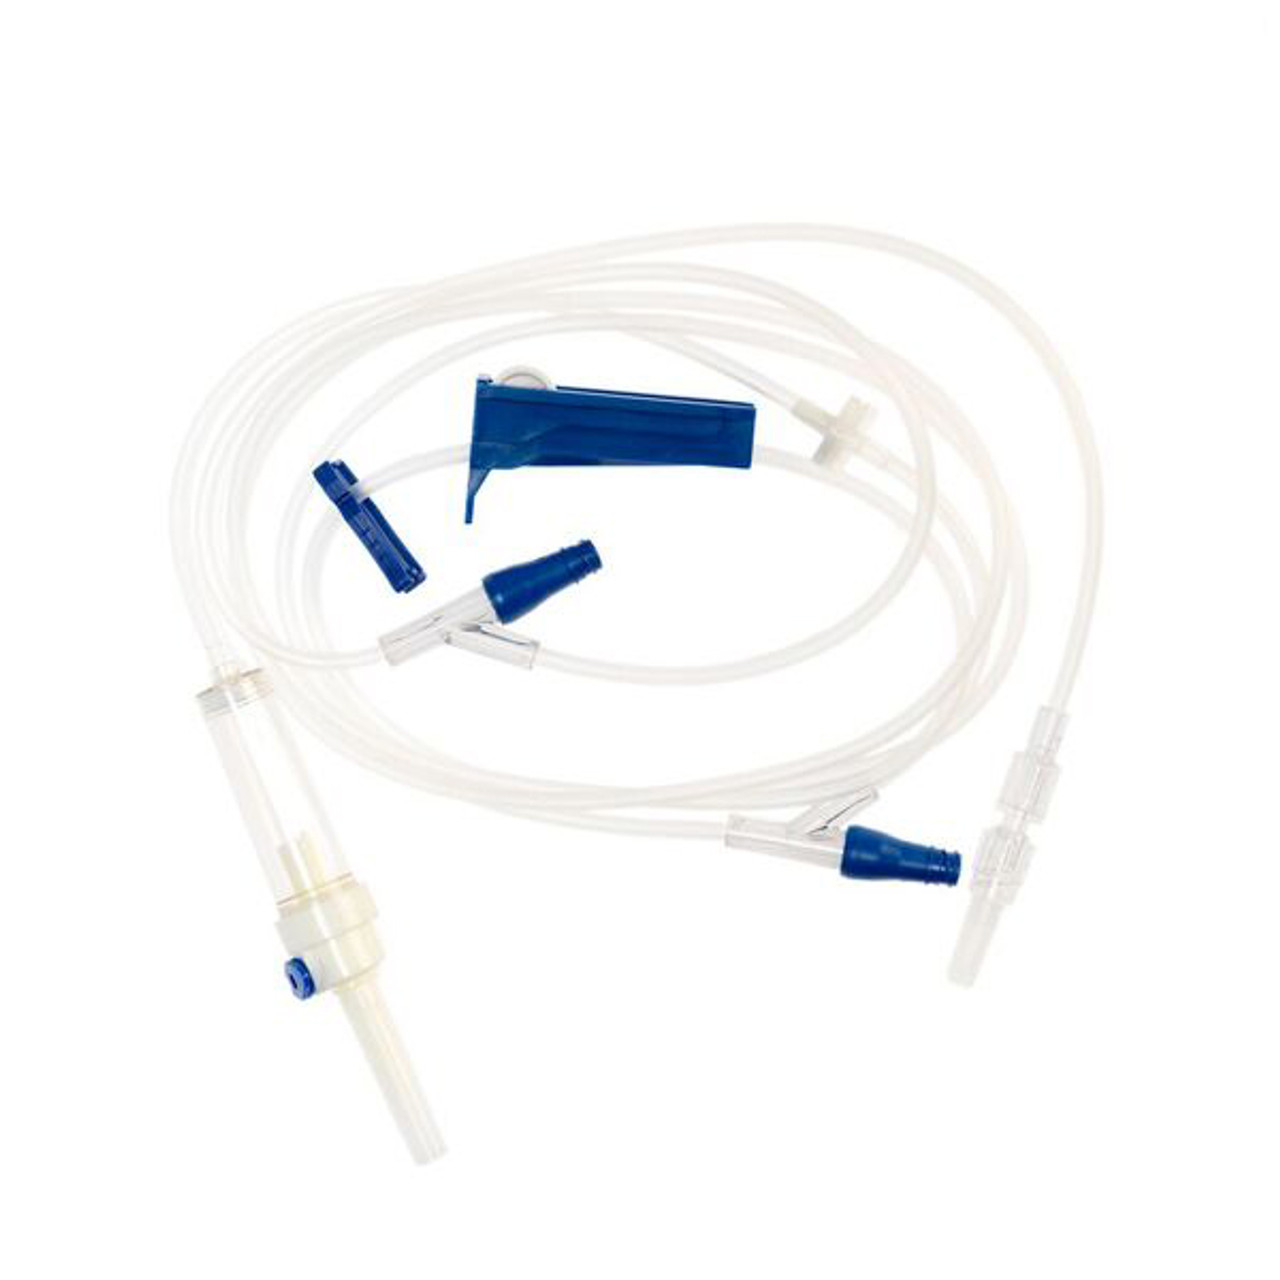 IV Administration Set With 2 Clave™ Needleless Access Ports • Box of 50